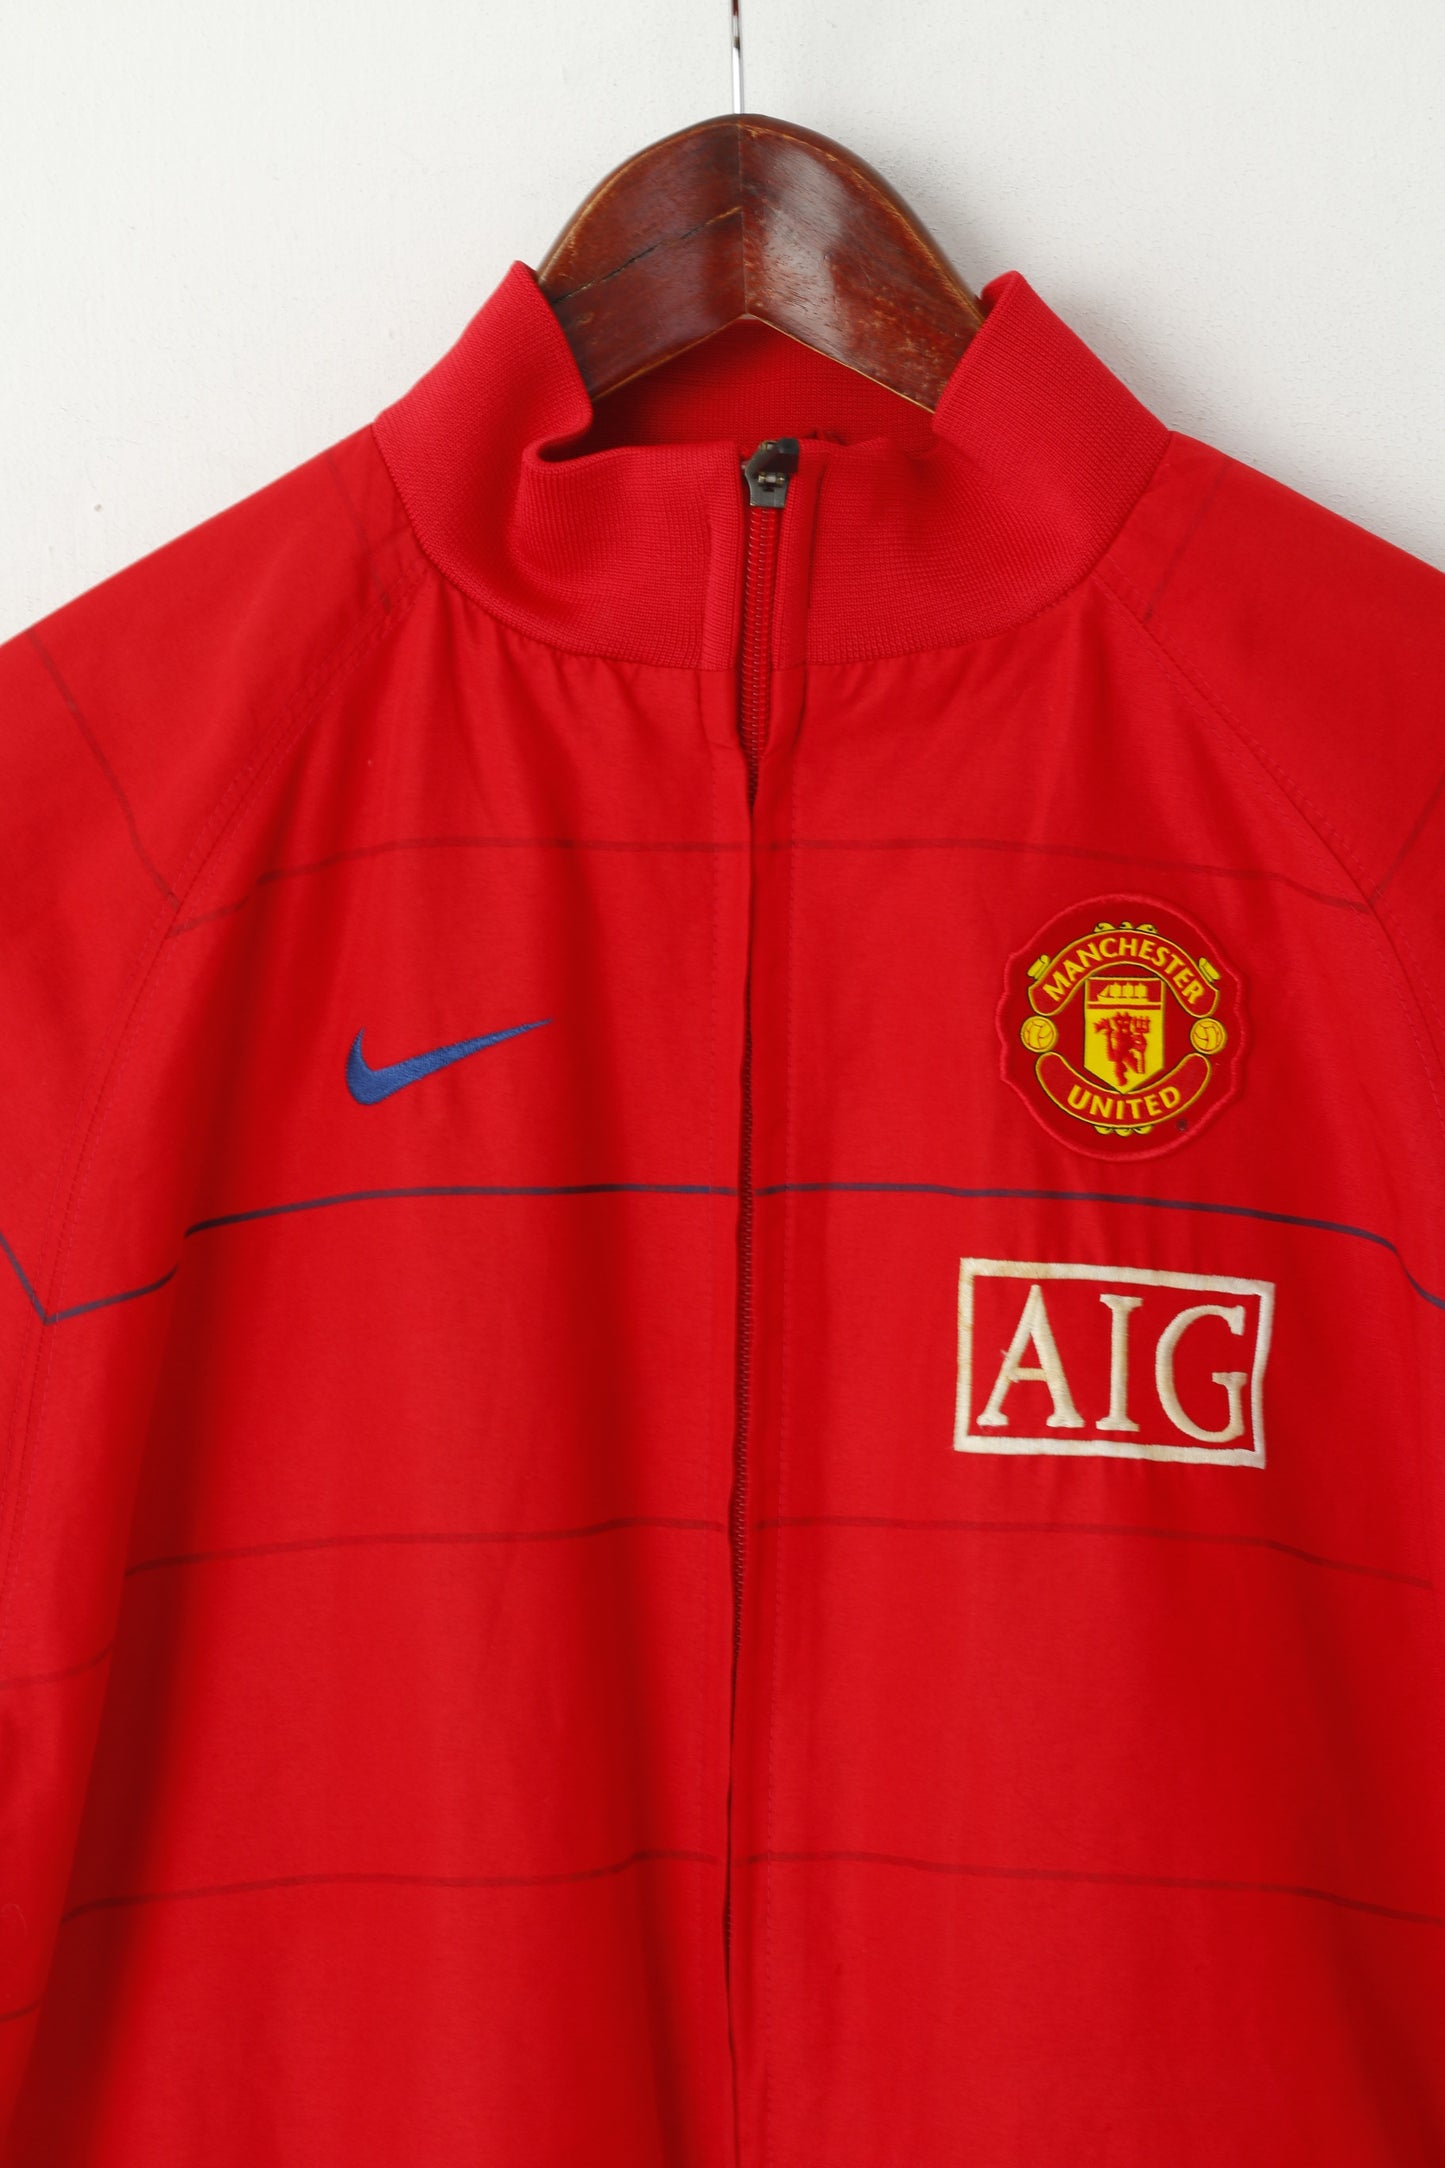 Giacca Nike Youth 13-15 anni 158-170 Rossa Manchester United Football Zip Up Top